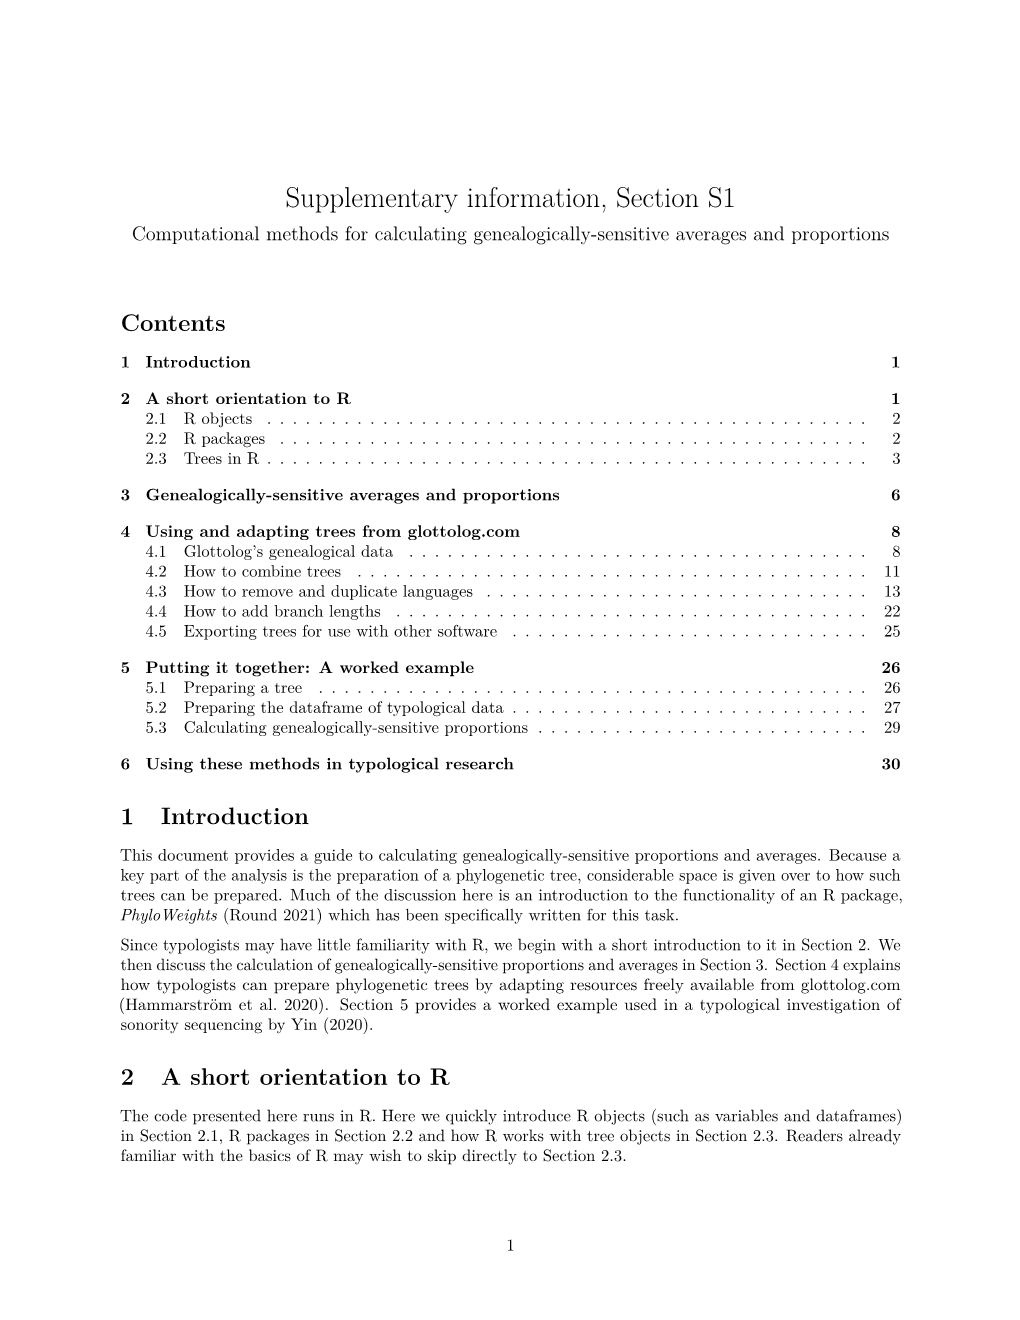 Supplementary Information, Section S1 Computational Methods for Calculating Genealogically-Sensitive Averages and Proportions